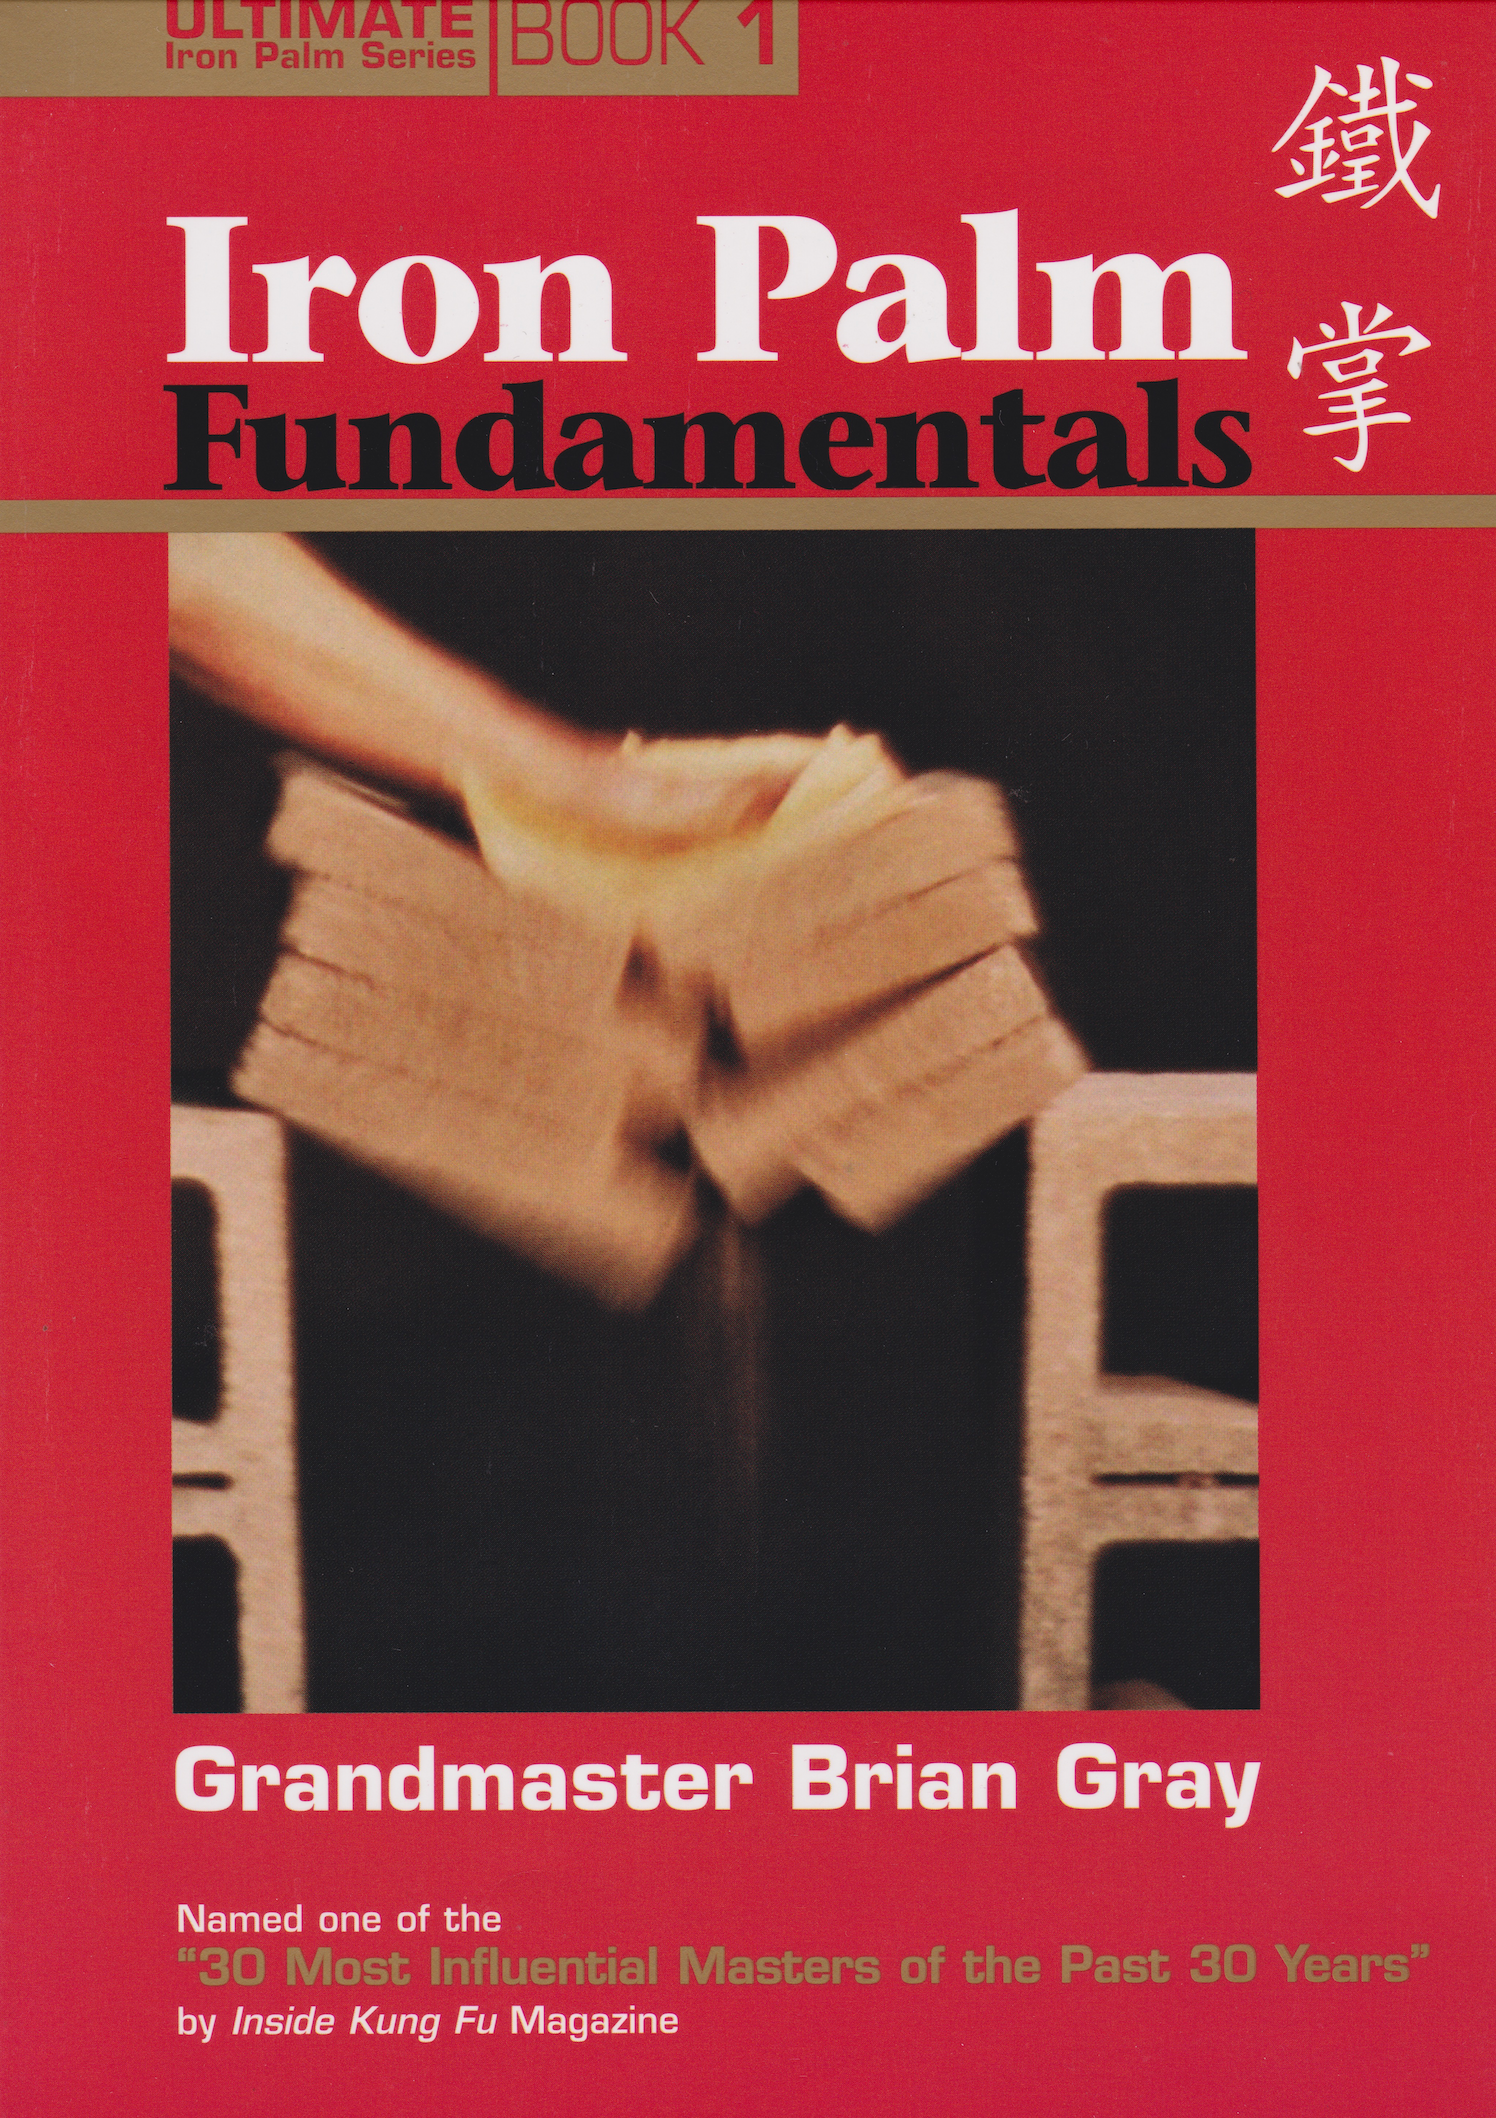 Ultimate Iron Palm Series Book 1: Iron Palm Fundamentals by Brian Gray (Preowned)